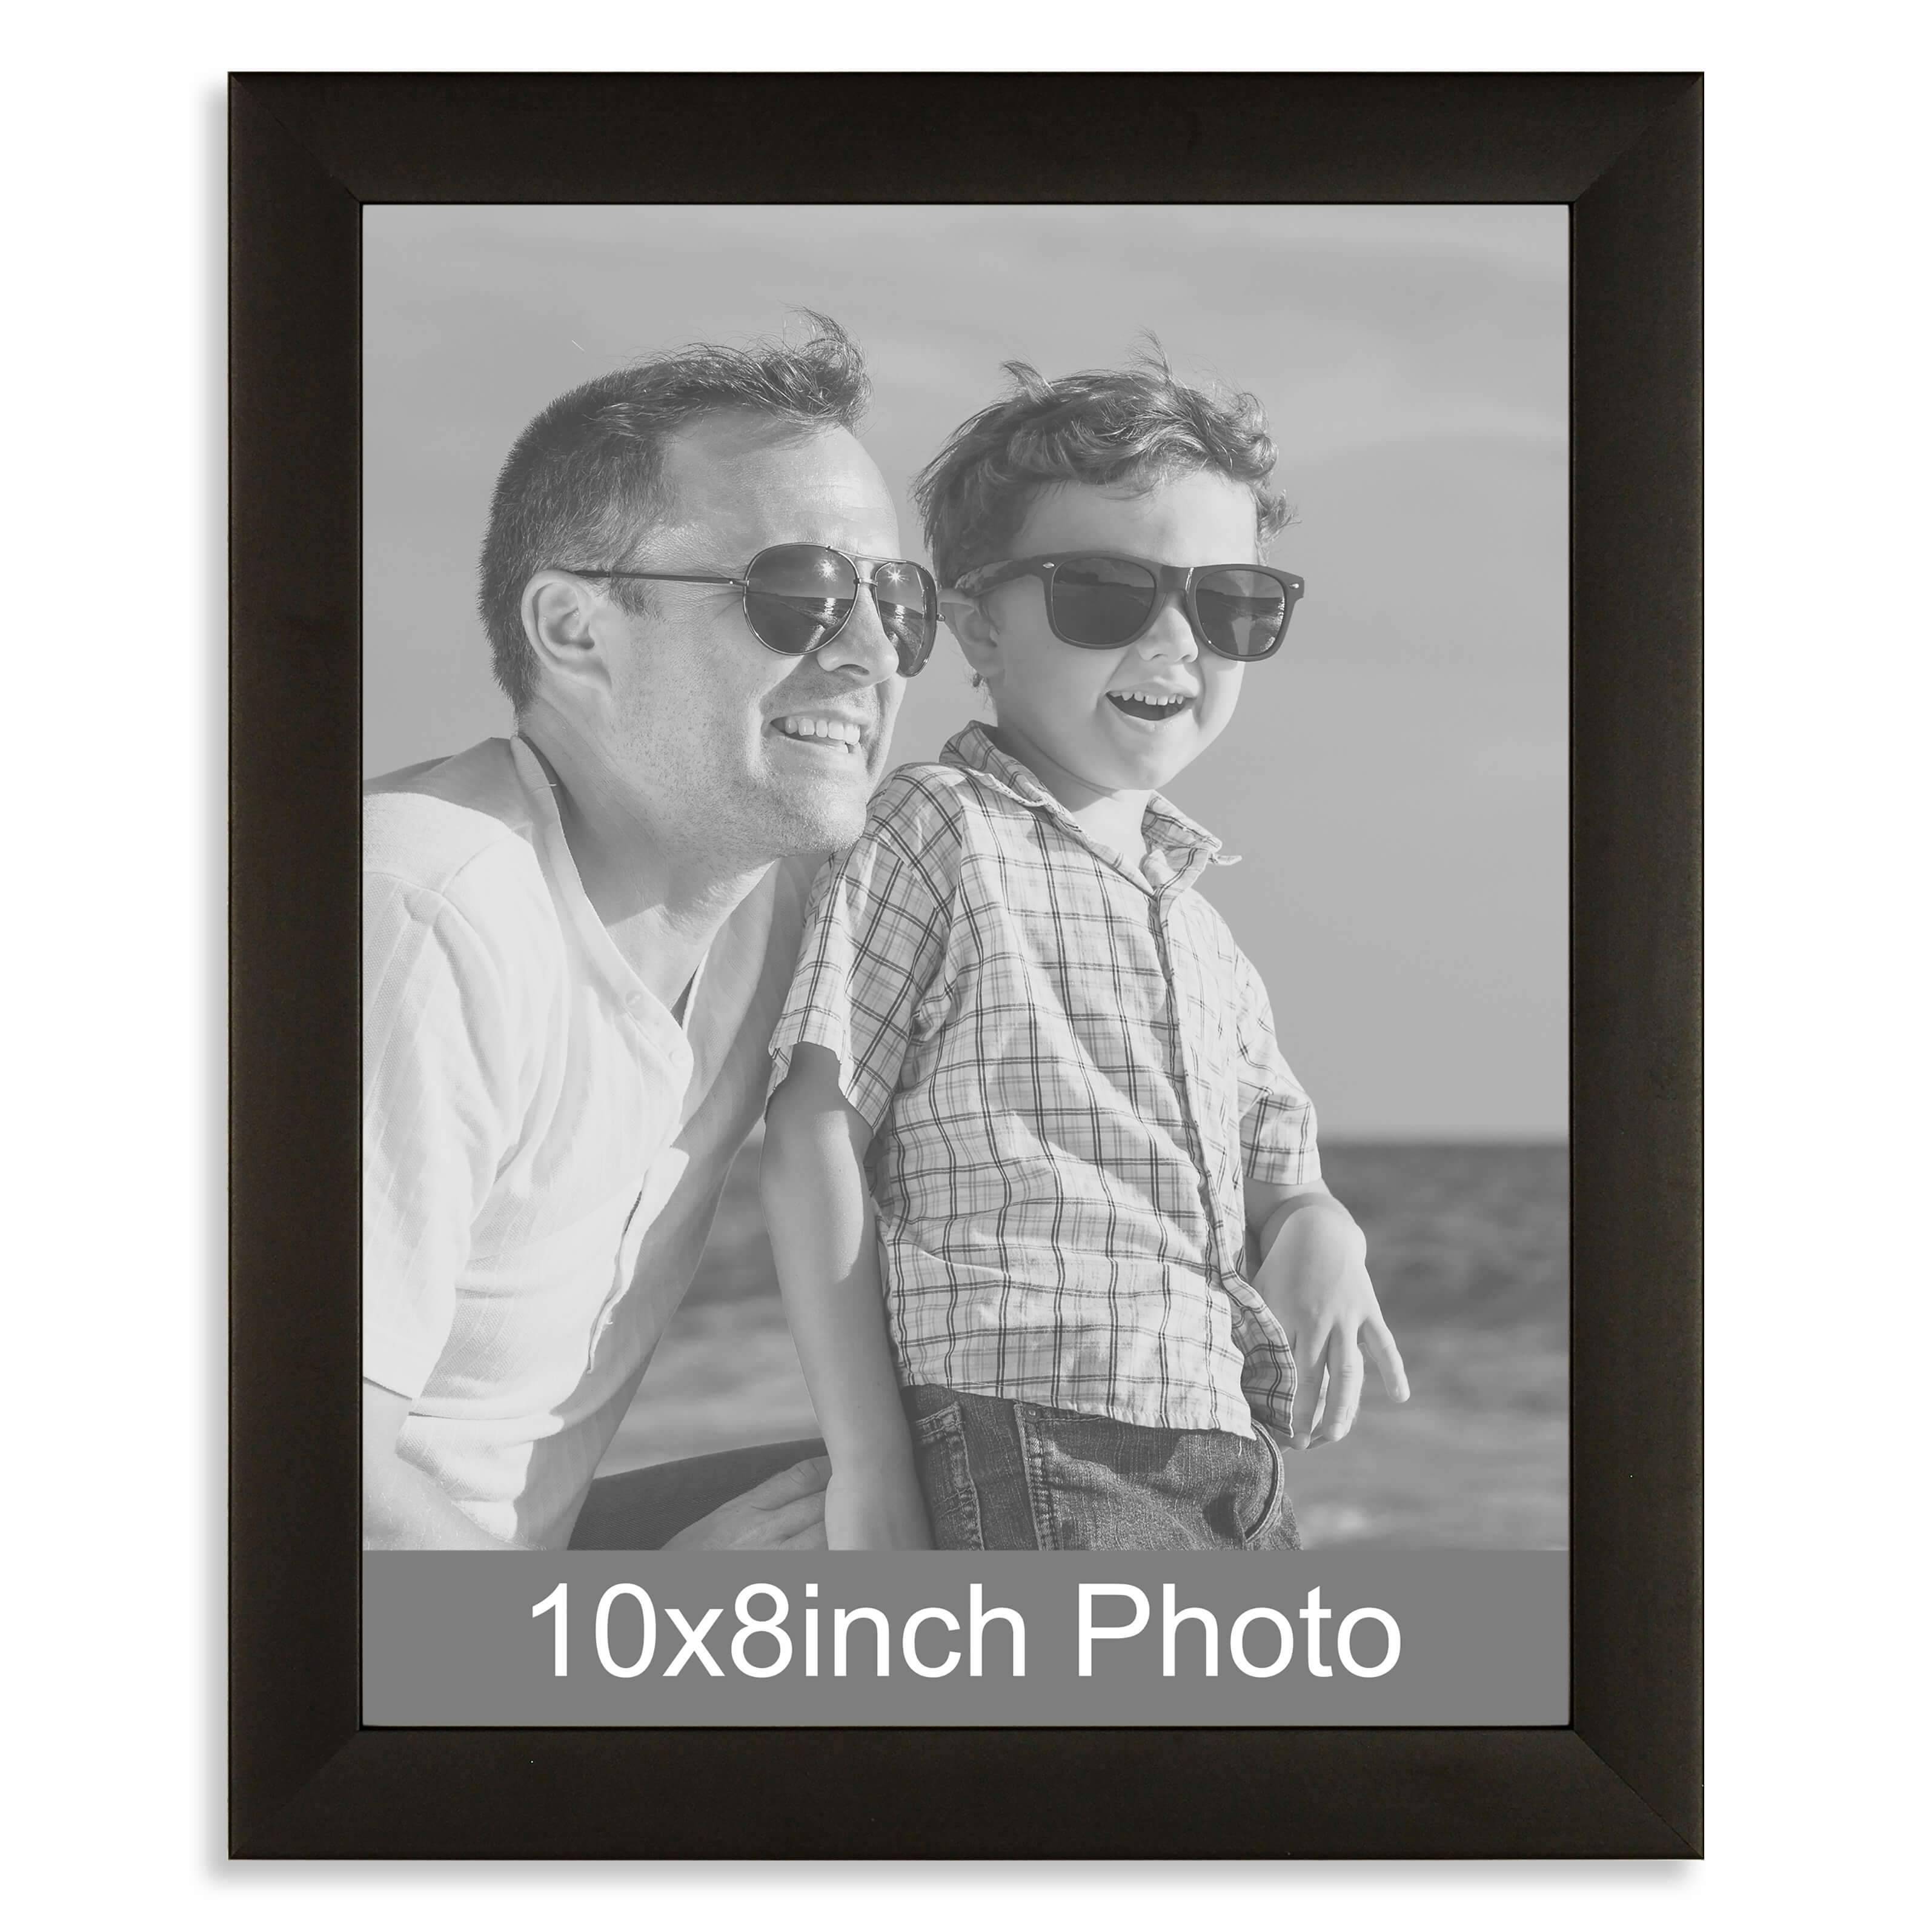 10 x 8inch Black Wooden Photo Frame for a 10×8/8x10in image – Photo Not Required